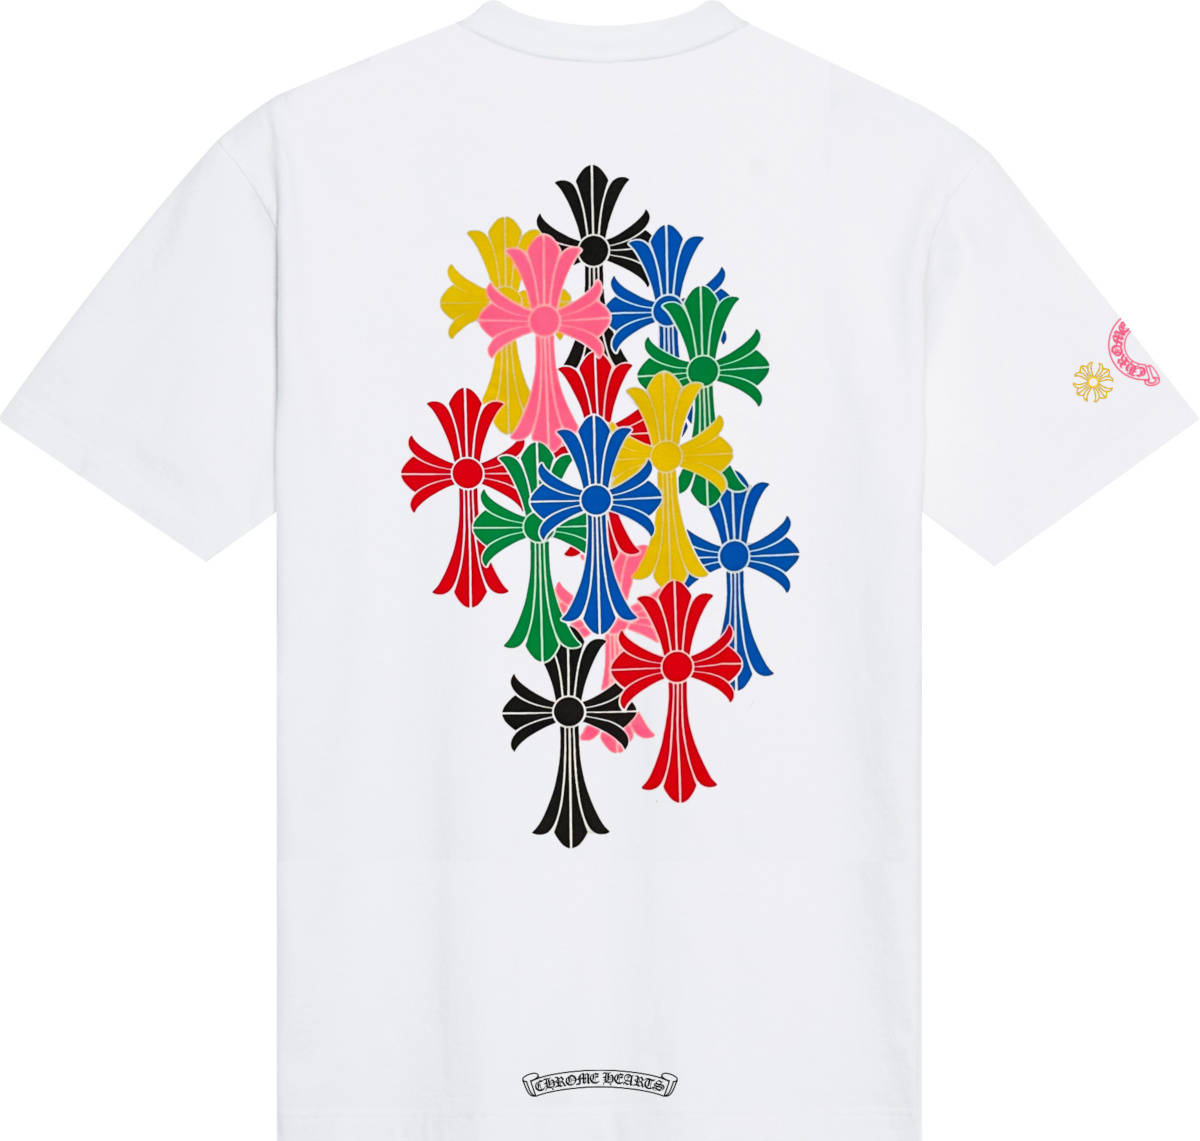 Colorful Chrome Hearts On White Shirt Background